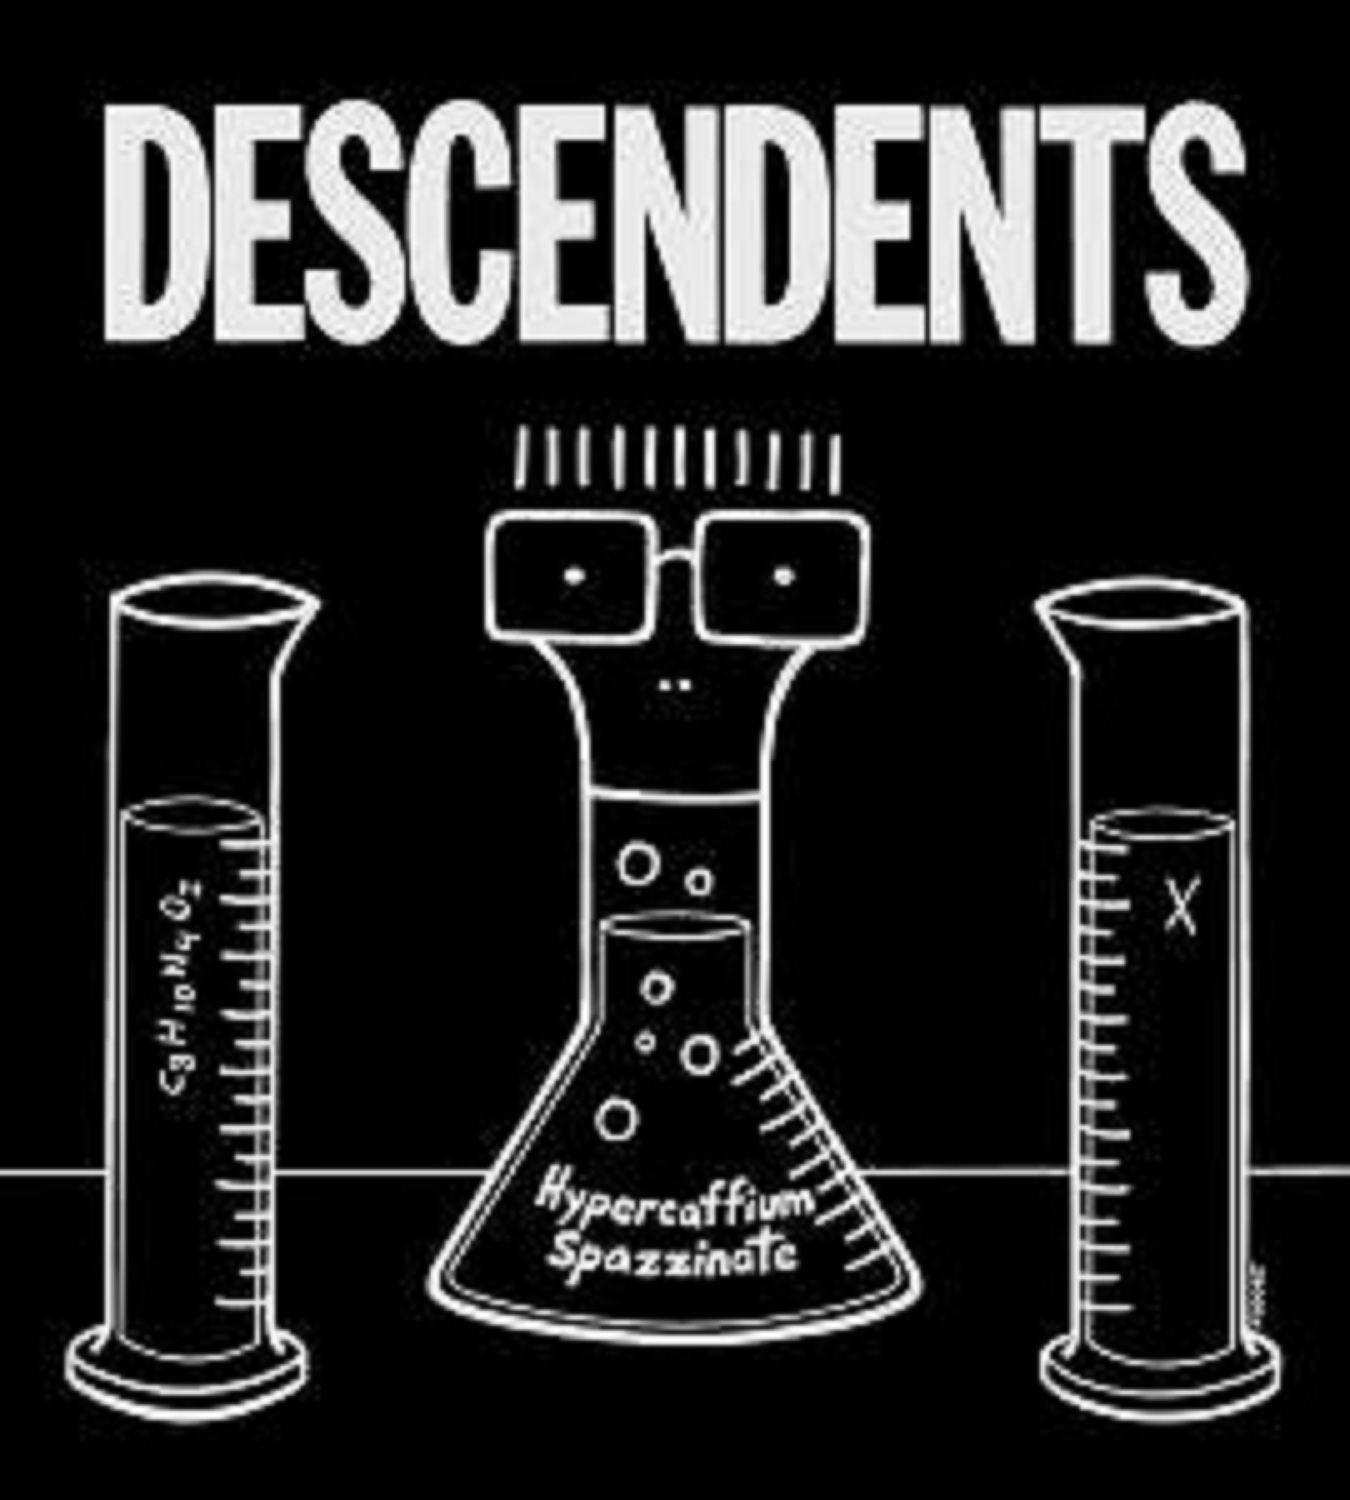 'Hypercaffium Spazzinate' by Descendents, album review by Gregory Adams.